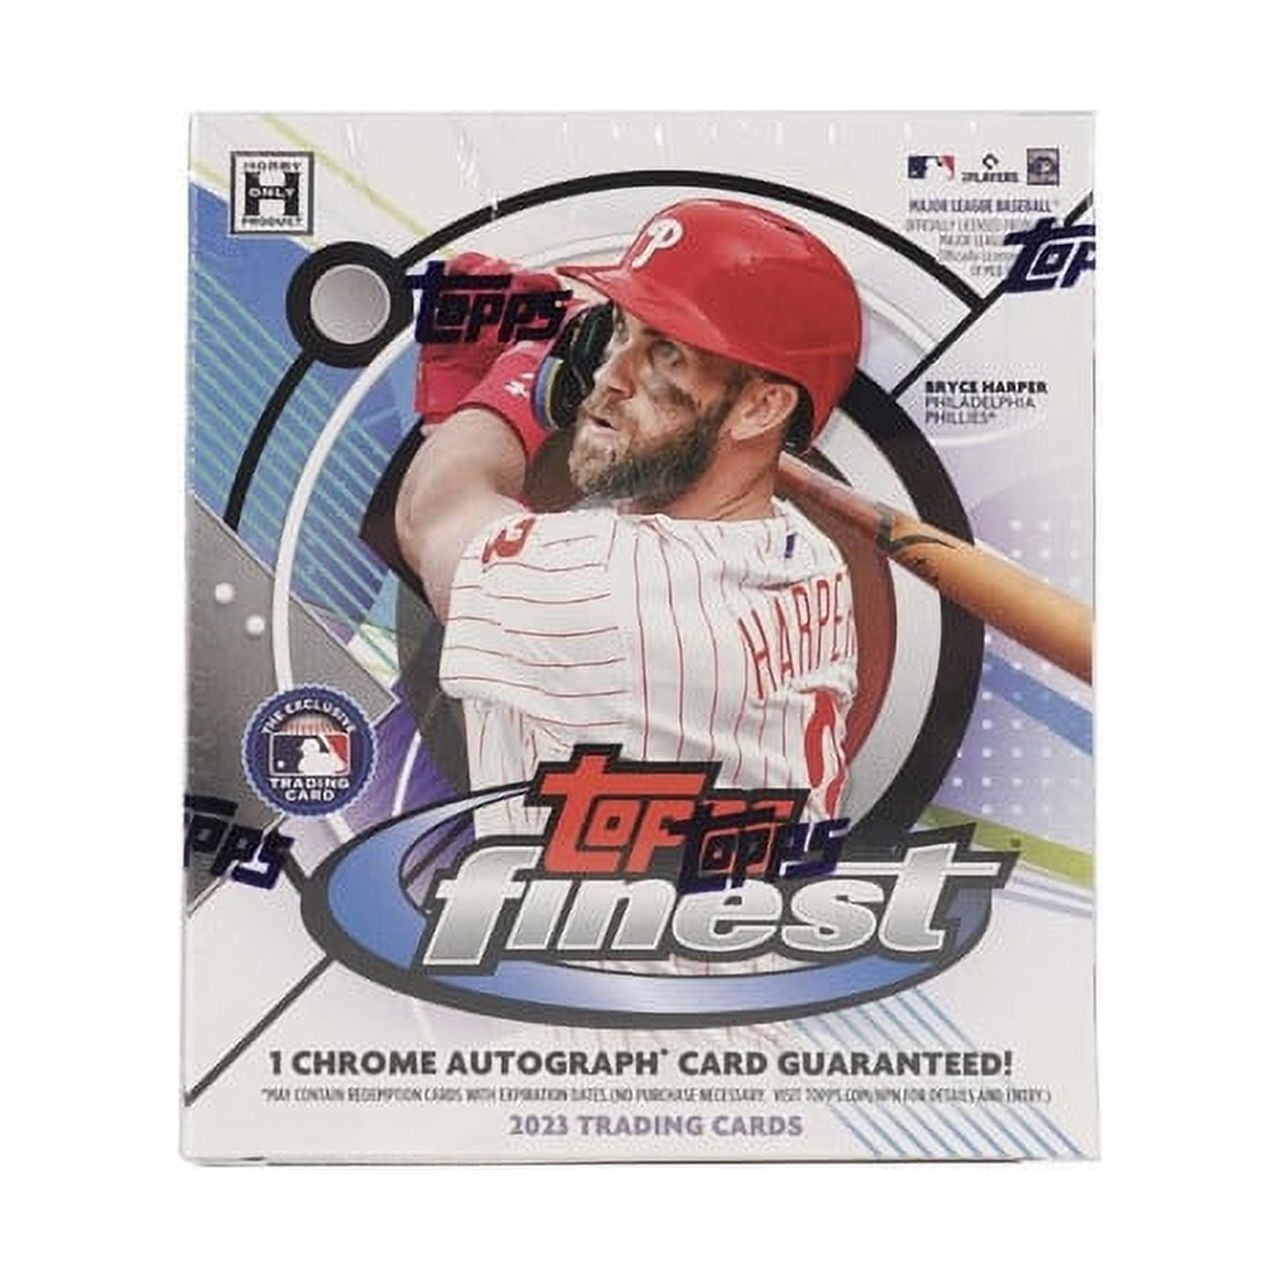 2023 Topps Baseball Rookie Card Guide, Gallery and Breakdown